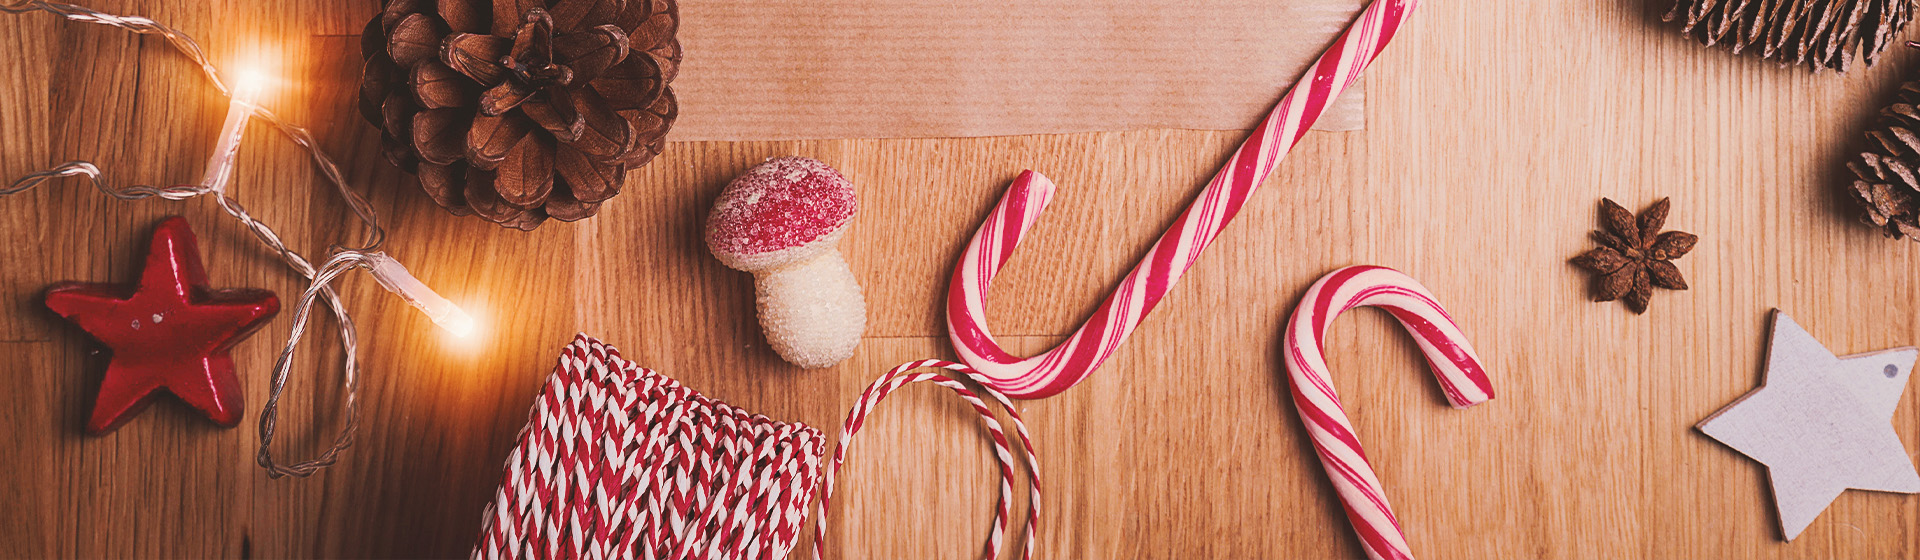 How to Prevent Tooth Decay During the Holidays